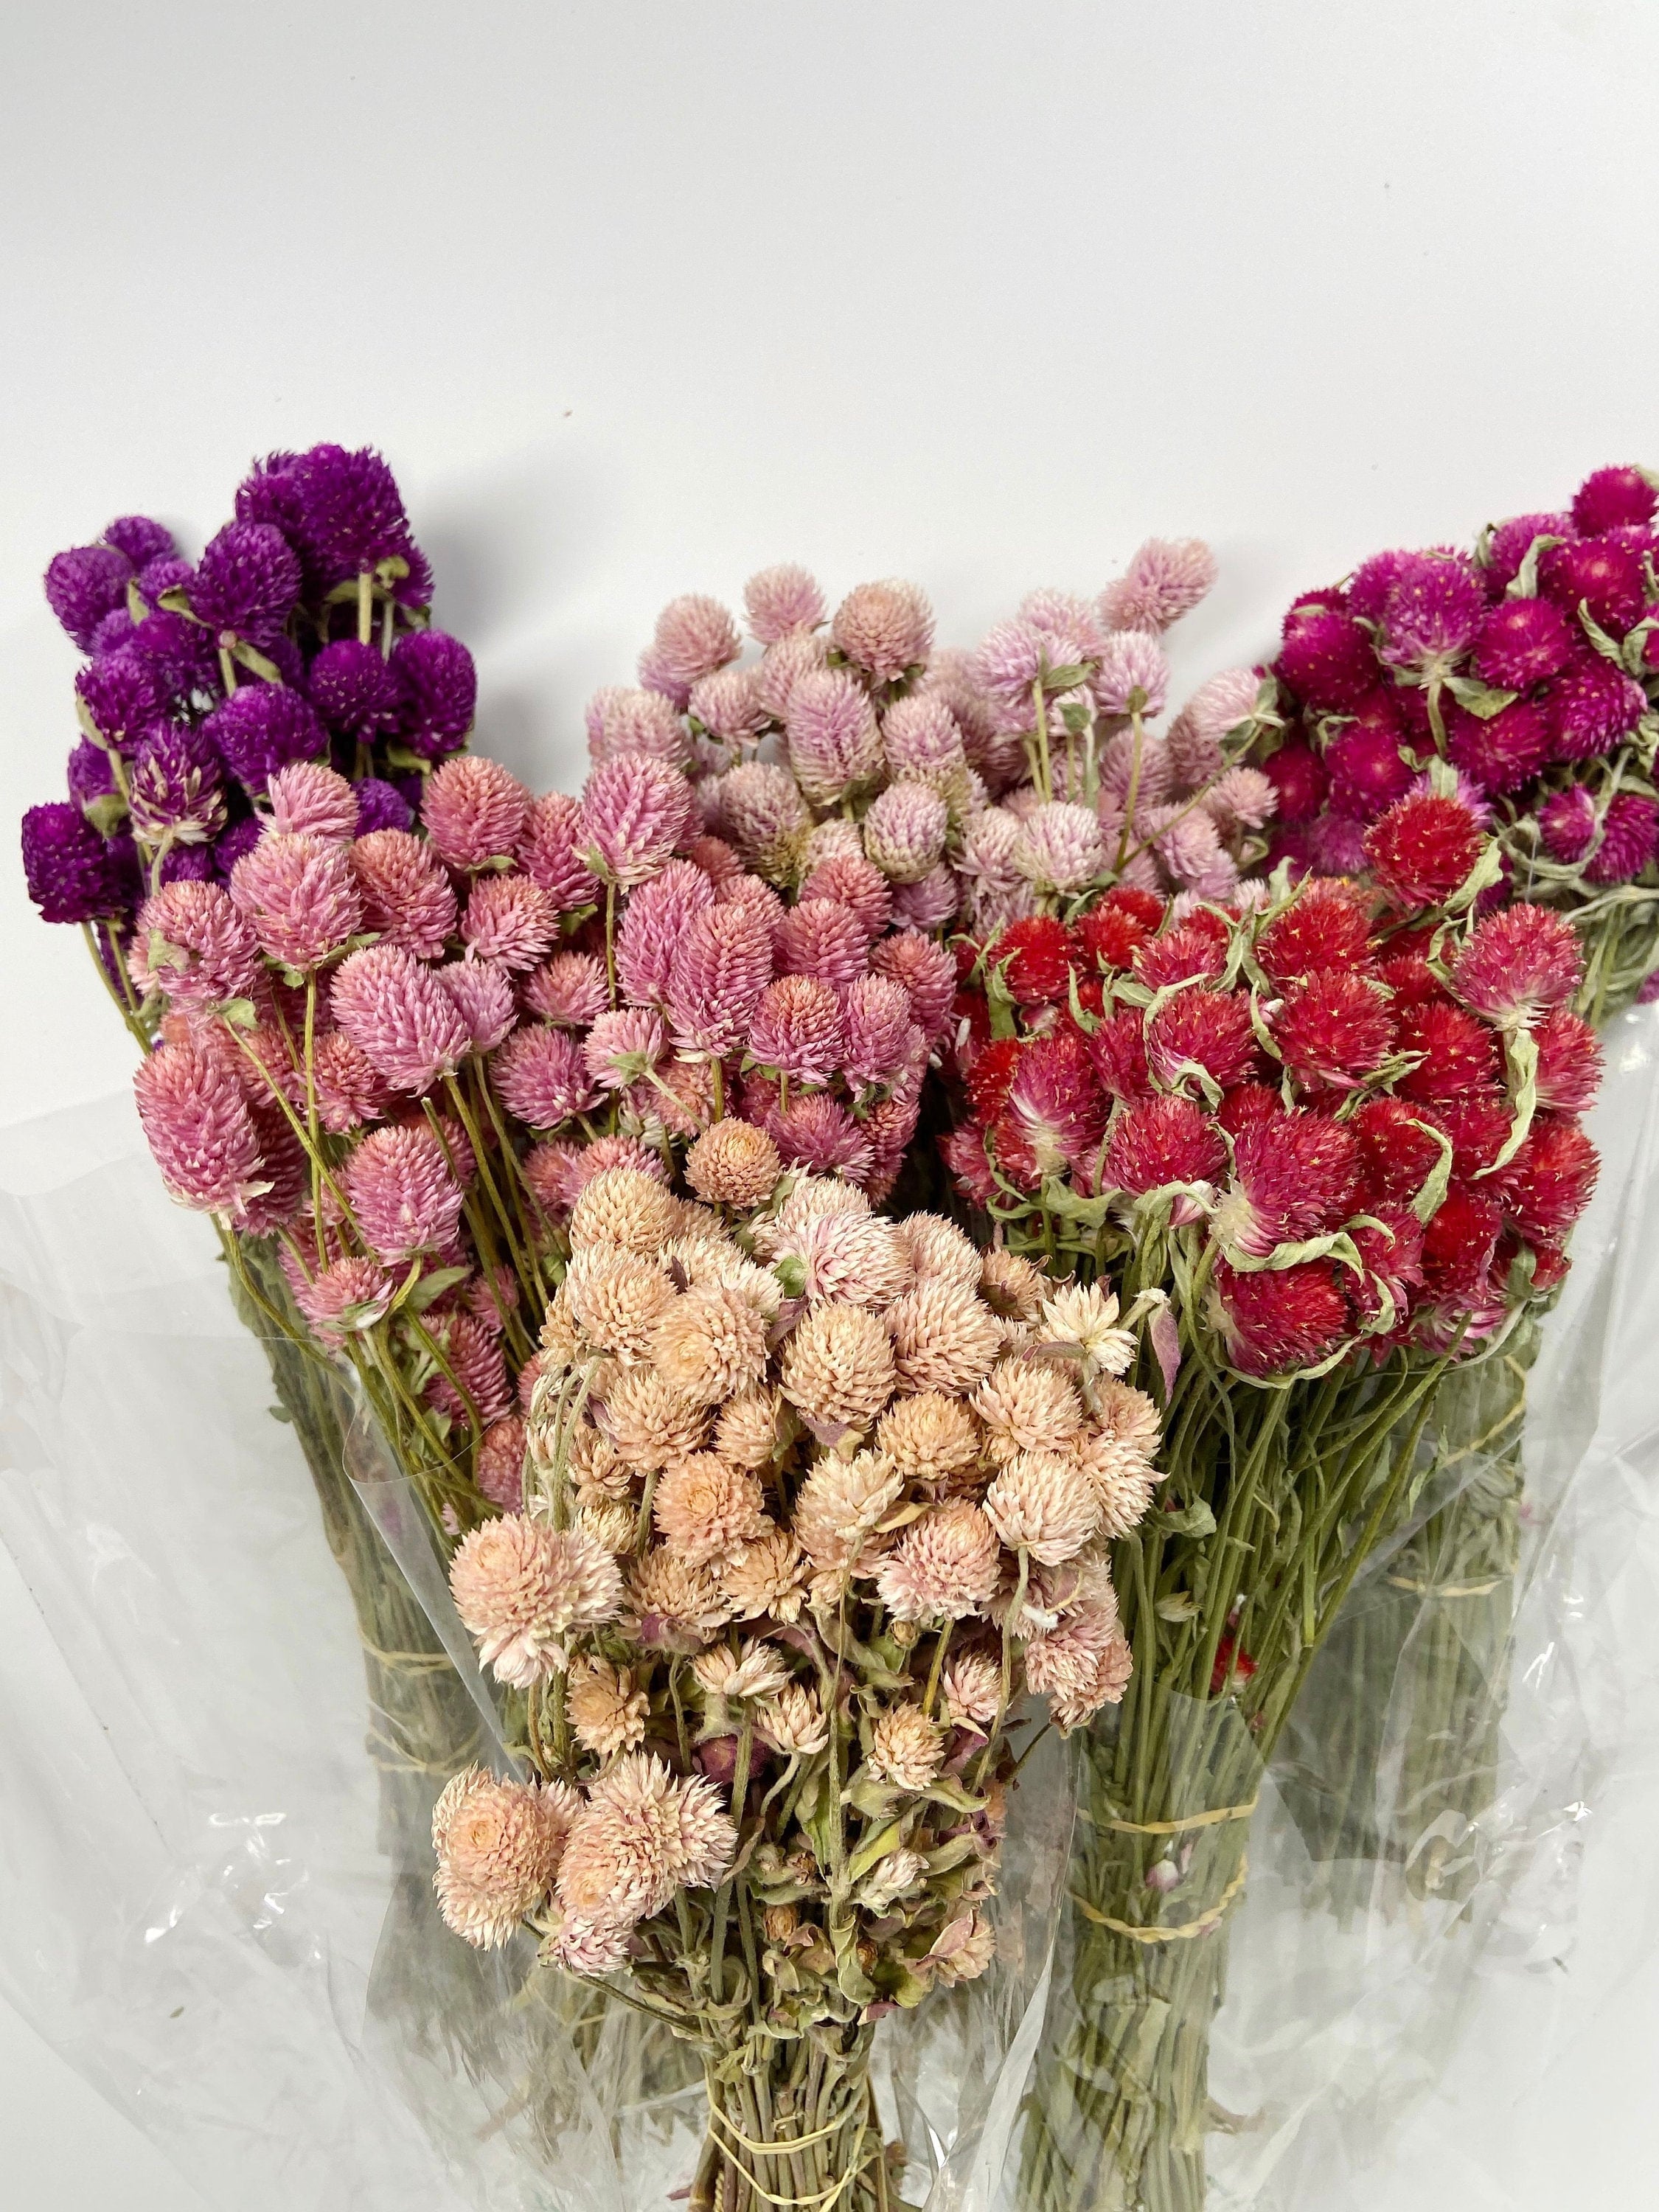 punvane Dried Flowers, Pink Dried Flowers Bouquet, 40 Natural Dried  Flowers, Aesthetic Dry Flowers for Decoration.(Pink)